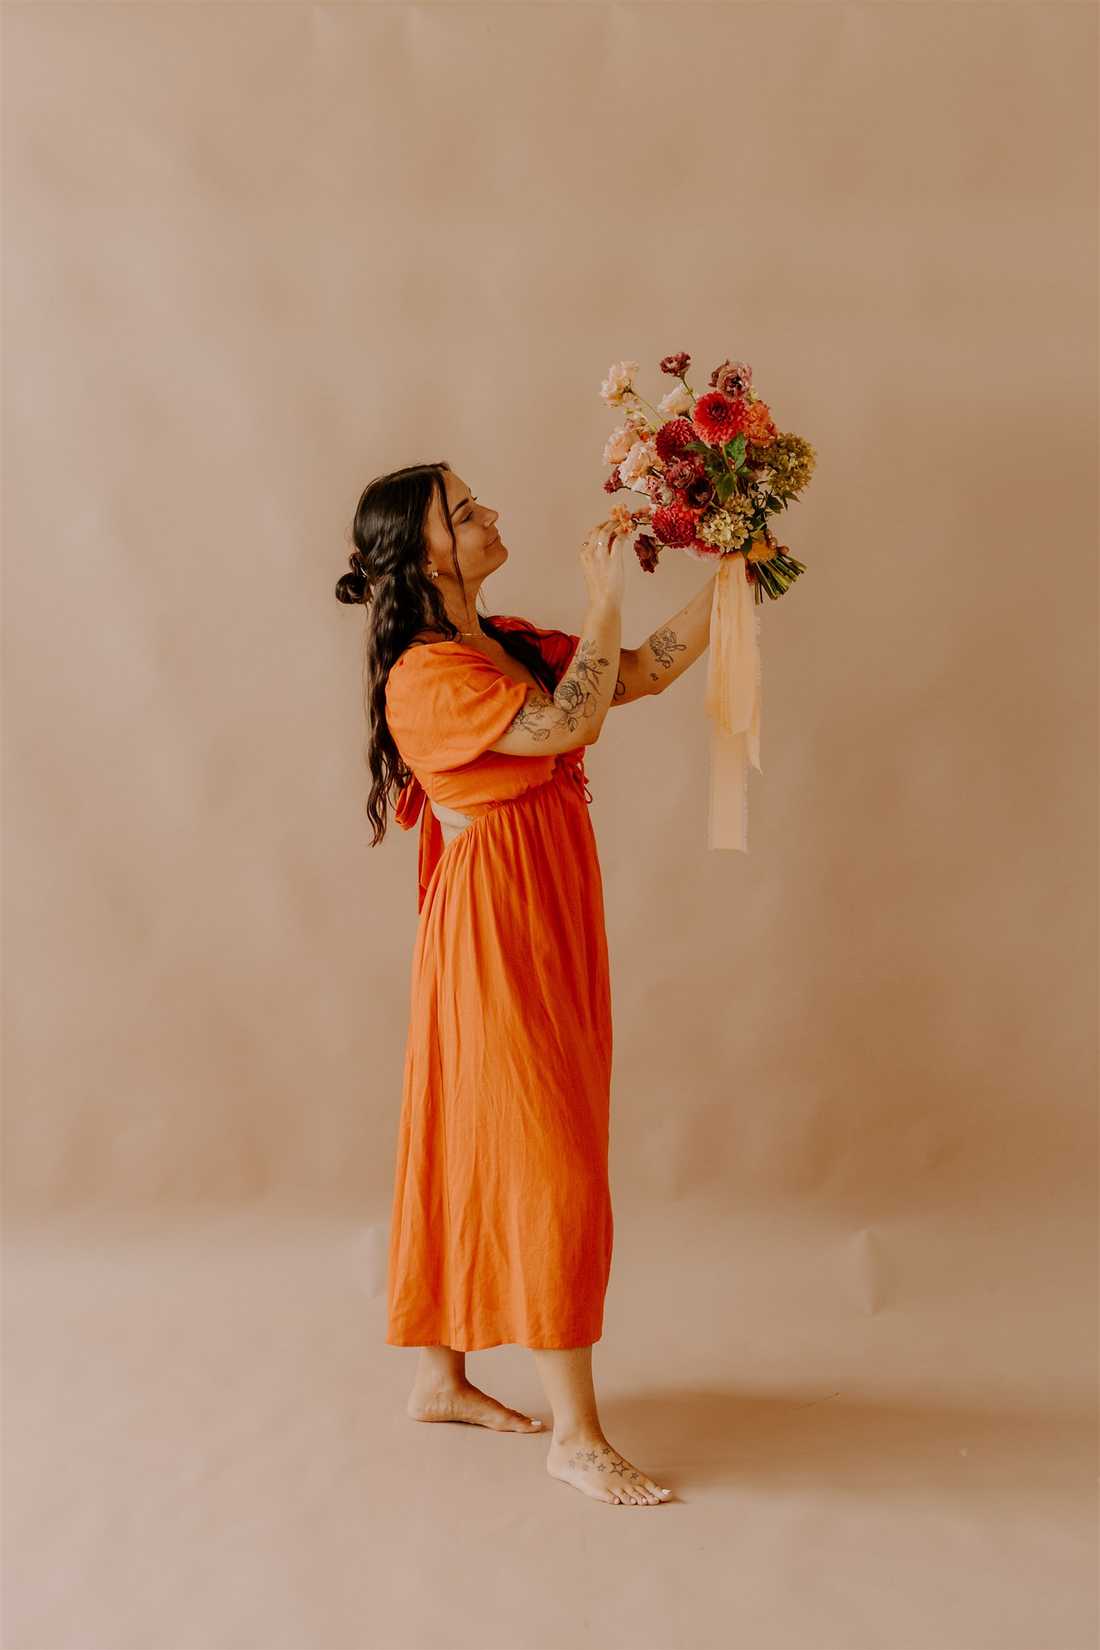 Sarina holding a bouquet of flowers